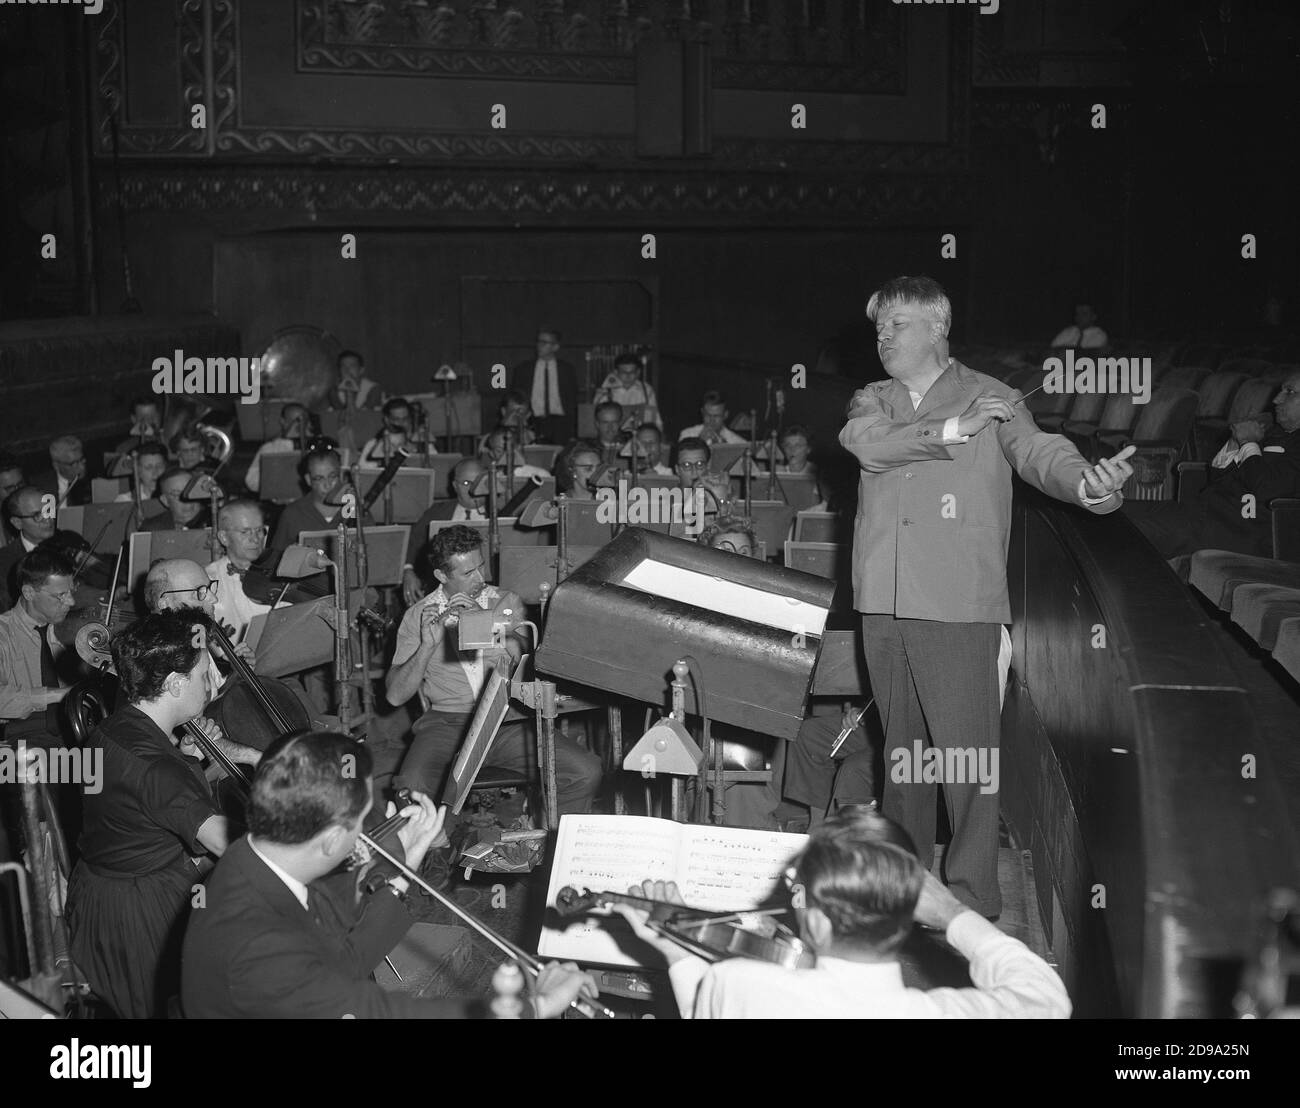 1959 , CHICAGO , USA : The renowned italian music conductor GIANANDREA GAVAZZENI ( 1909 - 1996 ) and the orchestra rehearsing Giuseppe Verdi 's " Simon Boccanegra "  in Chicago's Opera House, October 22, 1959 . Gianandrea Gavazzeni (25 July 1909 - 5 February 1996) was an Italian pianist, conductor (especially of opera), composer and musicologist . Gavazzeni was born in Bergamo. For almost 50 years, starting from 1948, he was principal conductor at La Scala, Milan, in 1966-68 being its music and artistic director. He had his Metropolitan Opera debut on 11 October 1976 . He conducted eight perfo Stock Photo